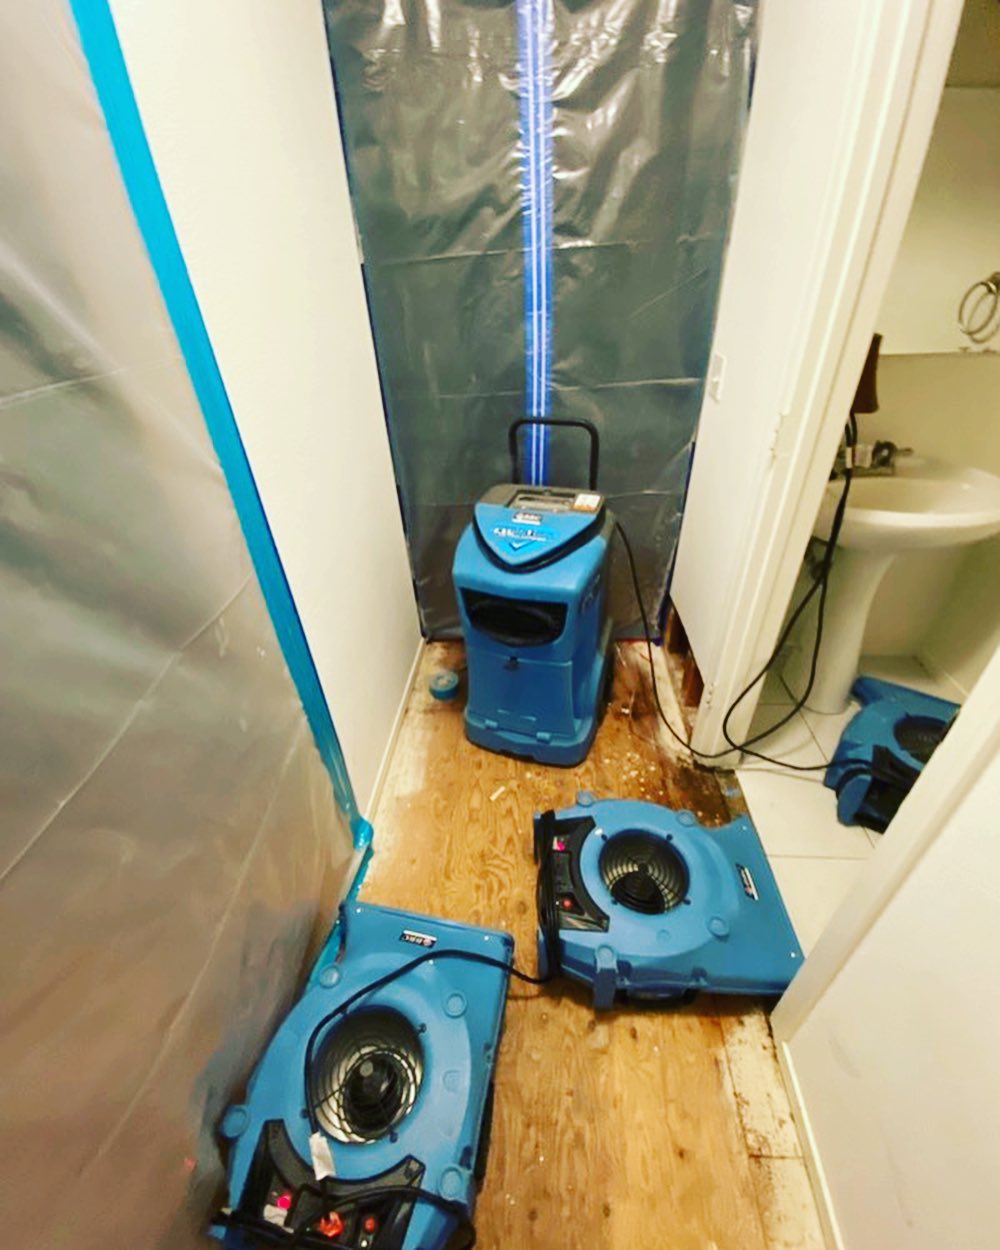 A bathroom with two blue vacuums on the floor, expertly cleaned by Bravo Restoration.